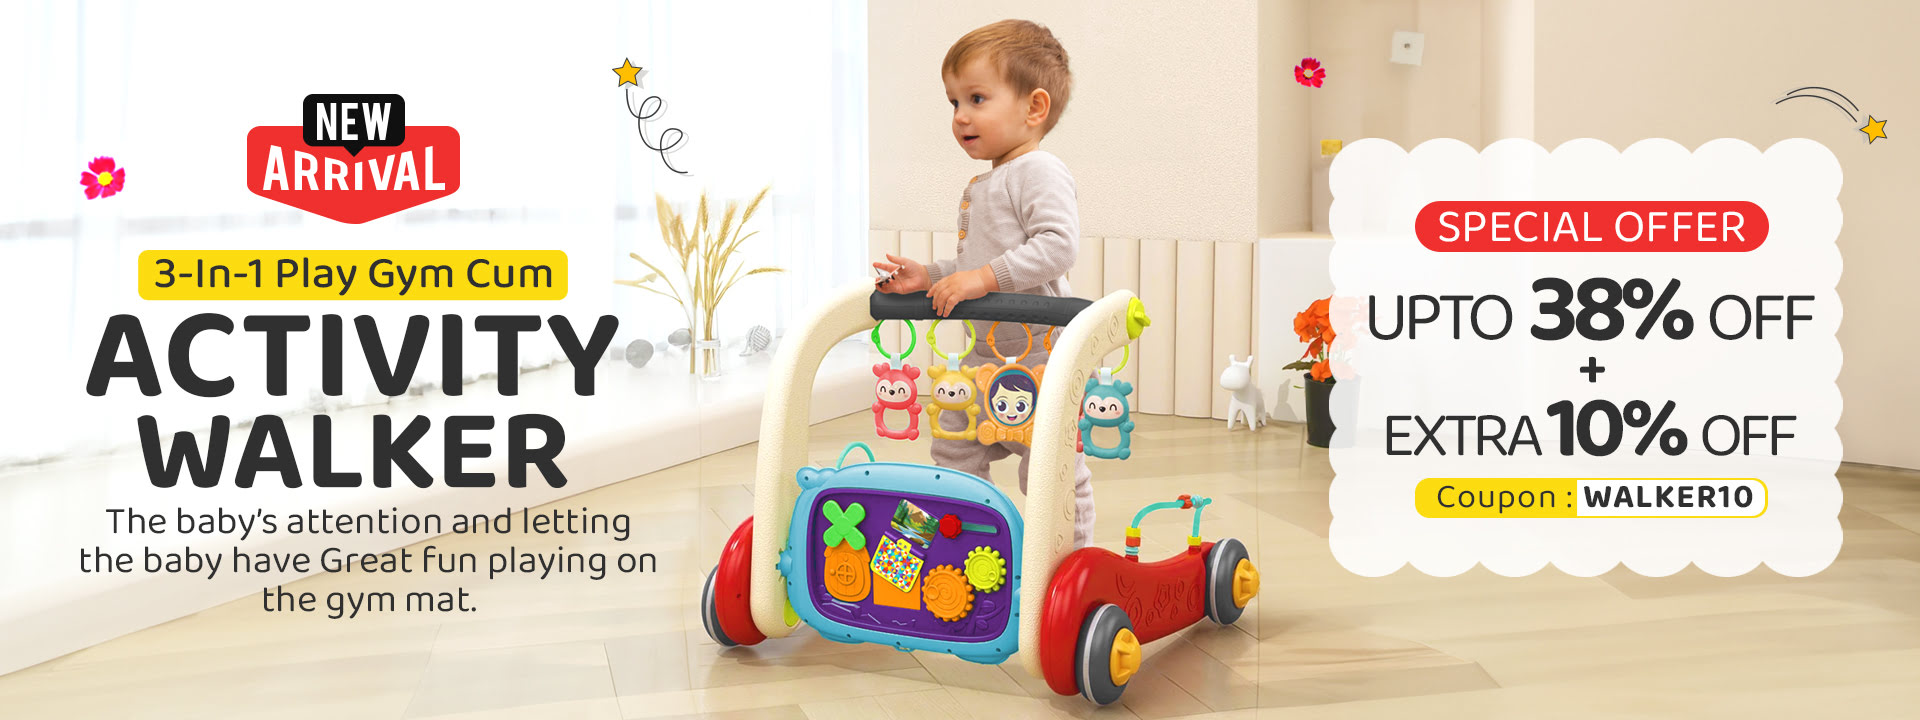 Baby Play gym activity walker